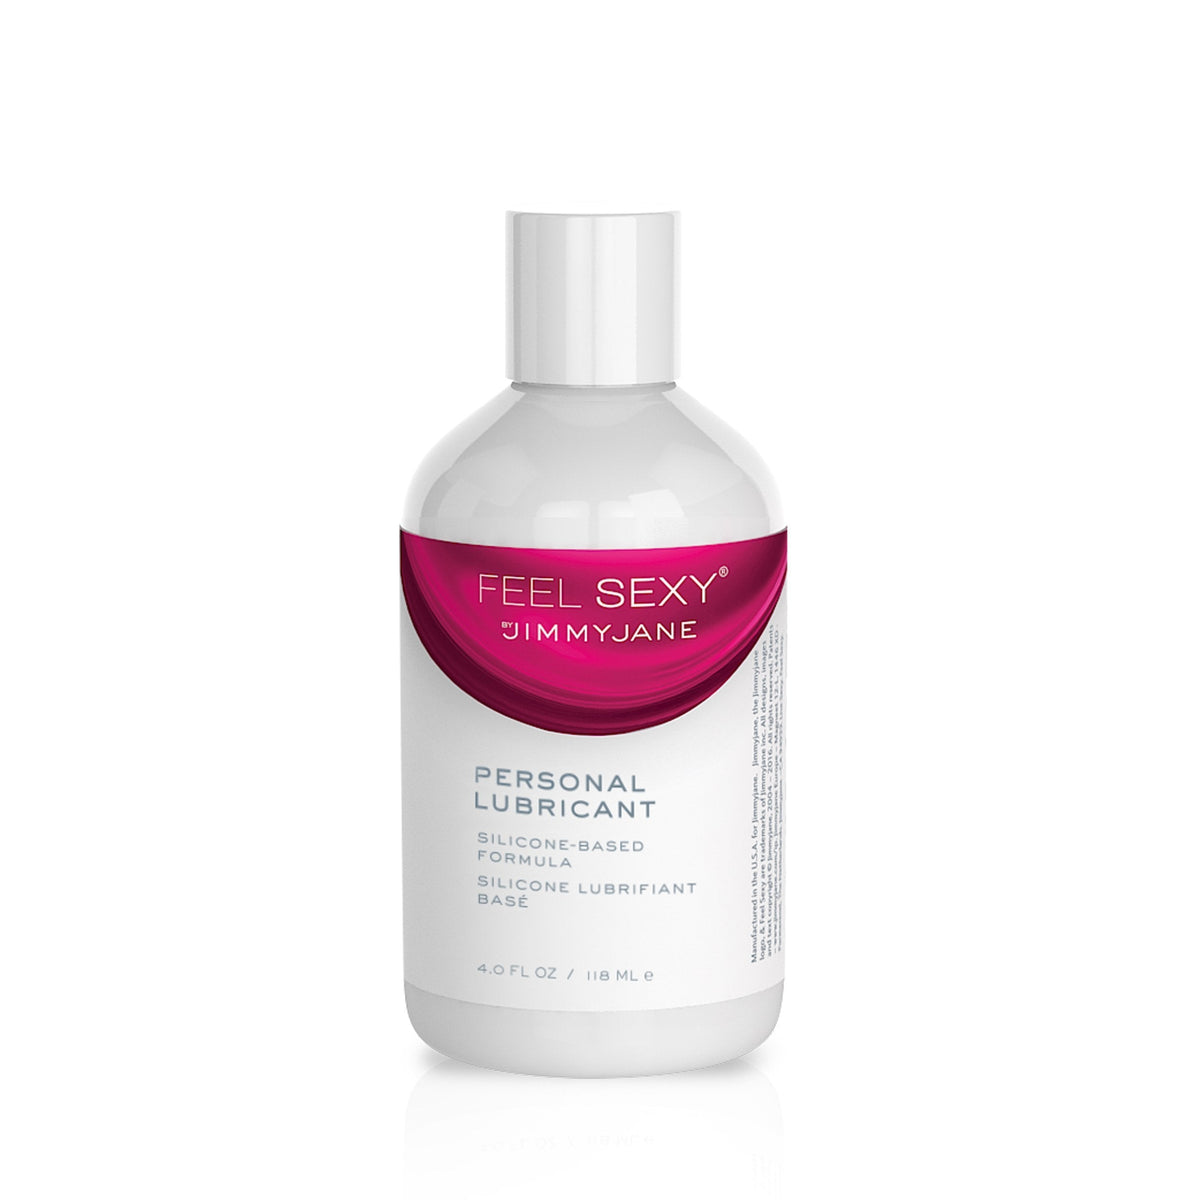 Jimmy Jane - Feel Sexy Personal Silicone-Based Lubricant 4oz (White) -  Lube (Silicone Based)  Durio.sg